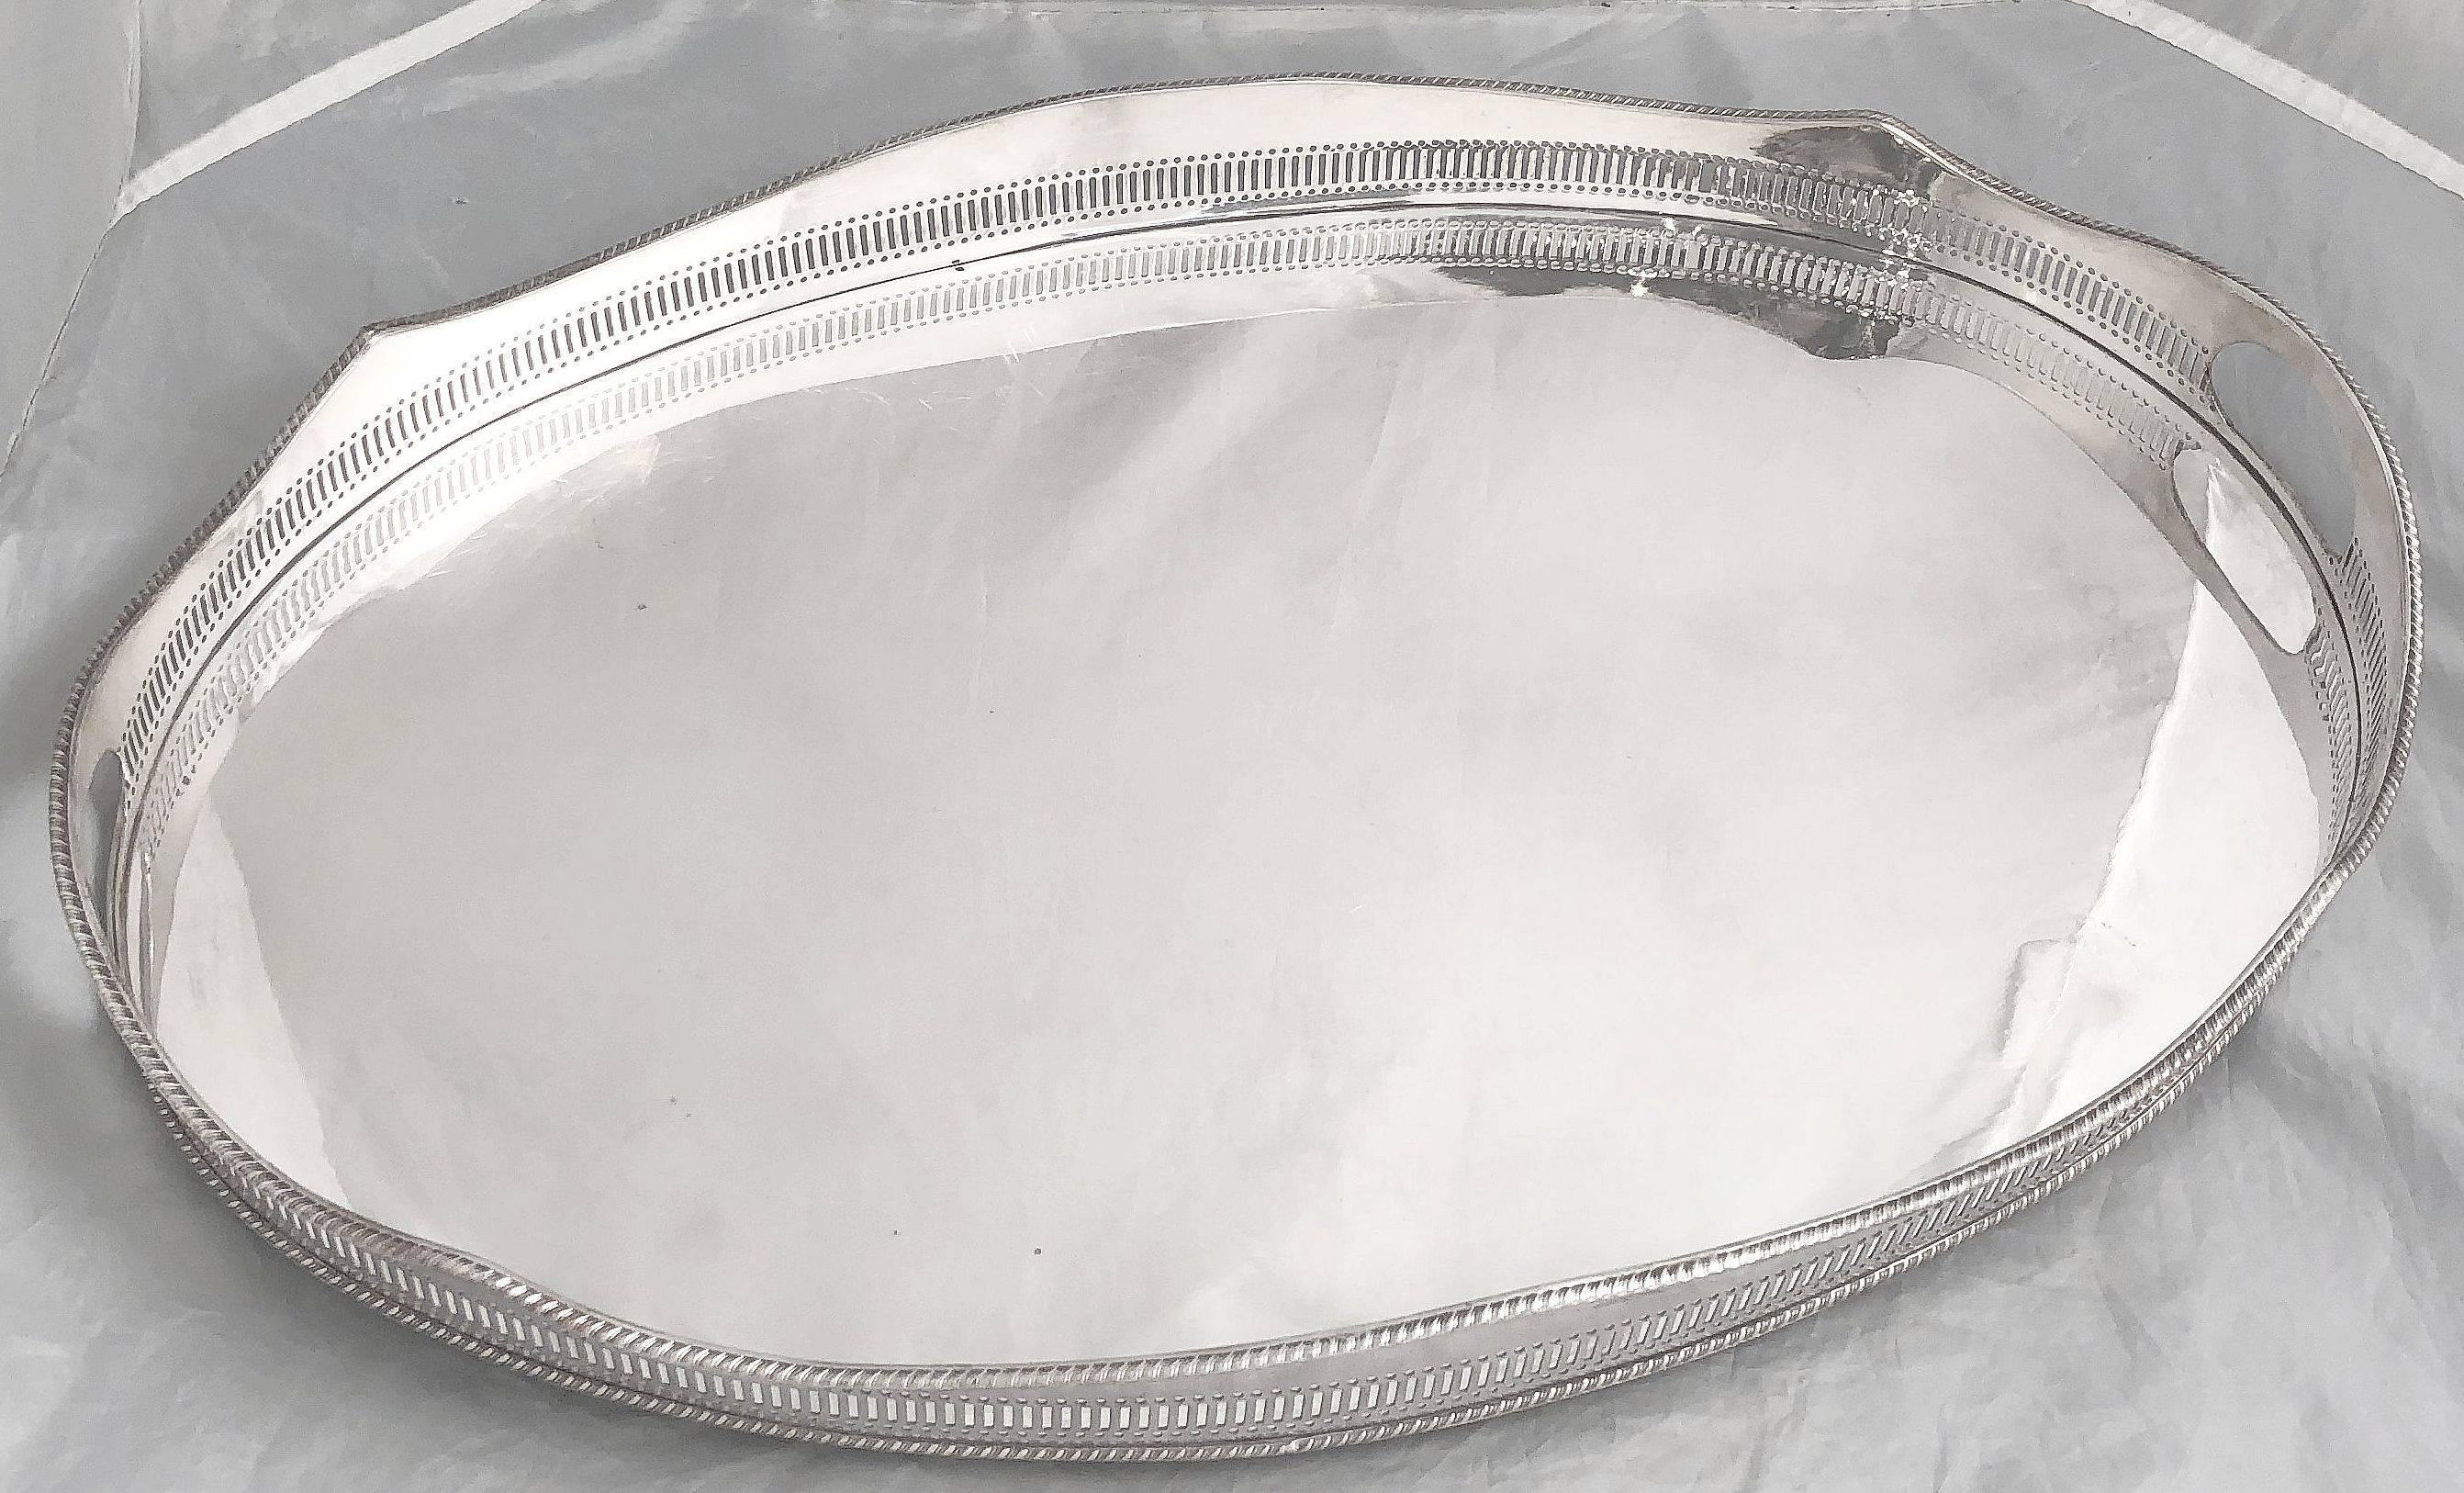 A handsome large English oval gallery serving tray with pierced serpentine gallery around the circumference. Of fine English plate silver.

Dimensions: Gallery H 2 1/4